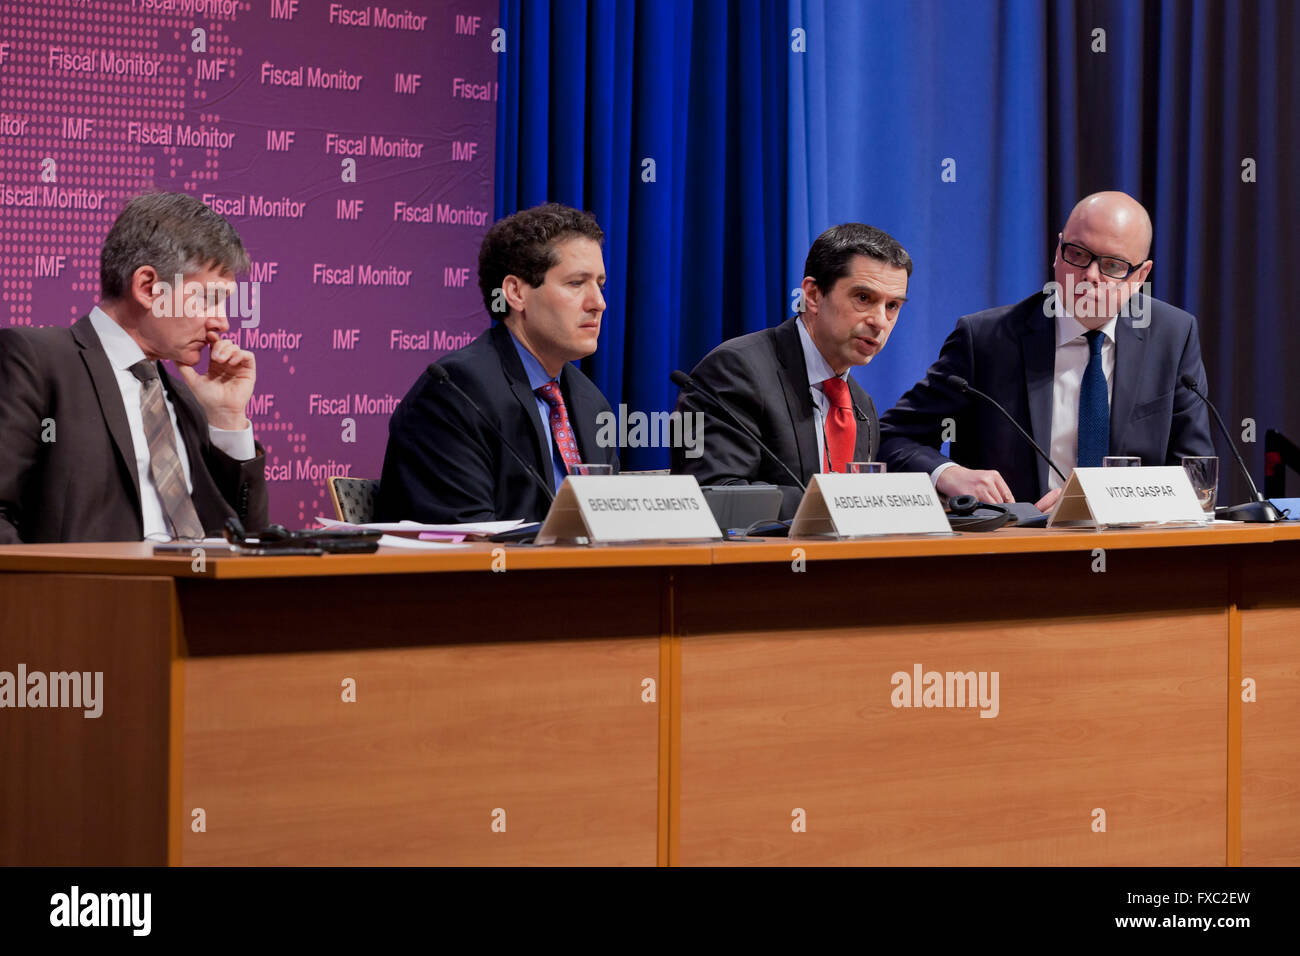 Washington DC, USA. 13th April, 2016. The Director of the International Monetary Fund Fiscal Affairs Department, Vitor Gaspar, along with Abdelhak Senhadji, Deputy Director, Benedict Clements, Division Chief, Fiscal Policy and Surveillance Division, and Wiktor Krzyzanowski, Senior Press Officer, Communications Department, briefs the media on its Fiscal policies for Innovation and growth. Credit:  B Christopher/Alamy Live News Stock Photo